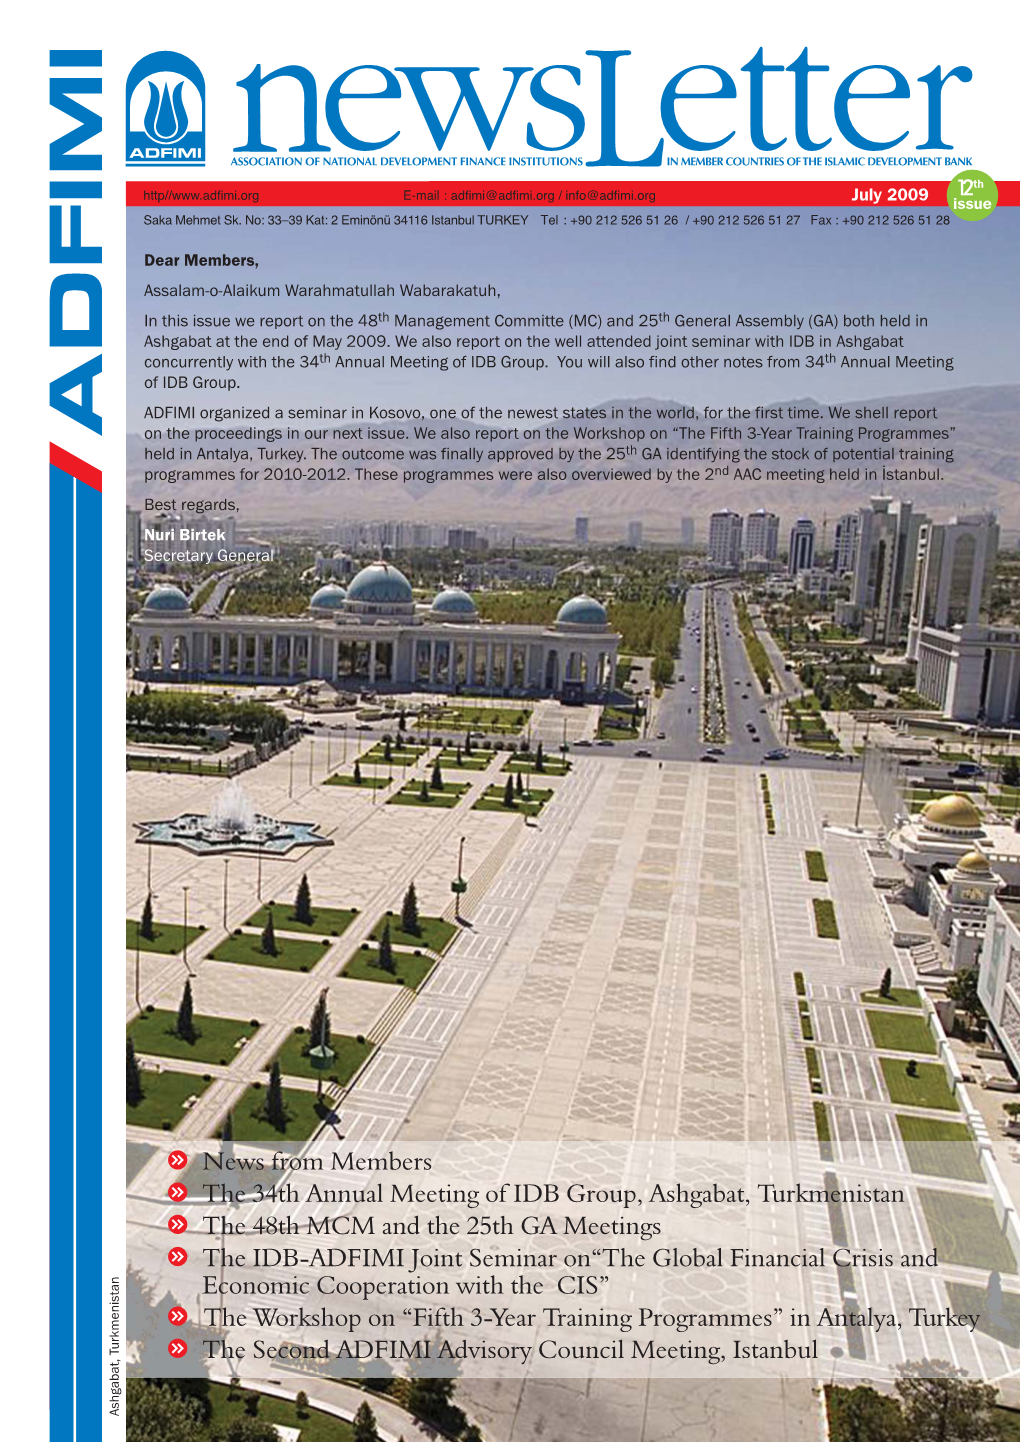 News from Members the 34Th Annual Meeting of IDB Group, Ashgabat